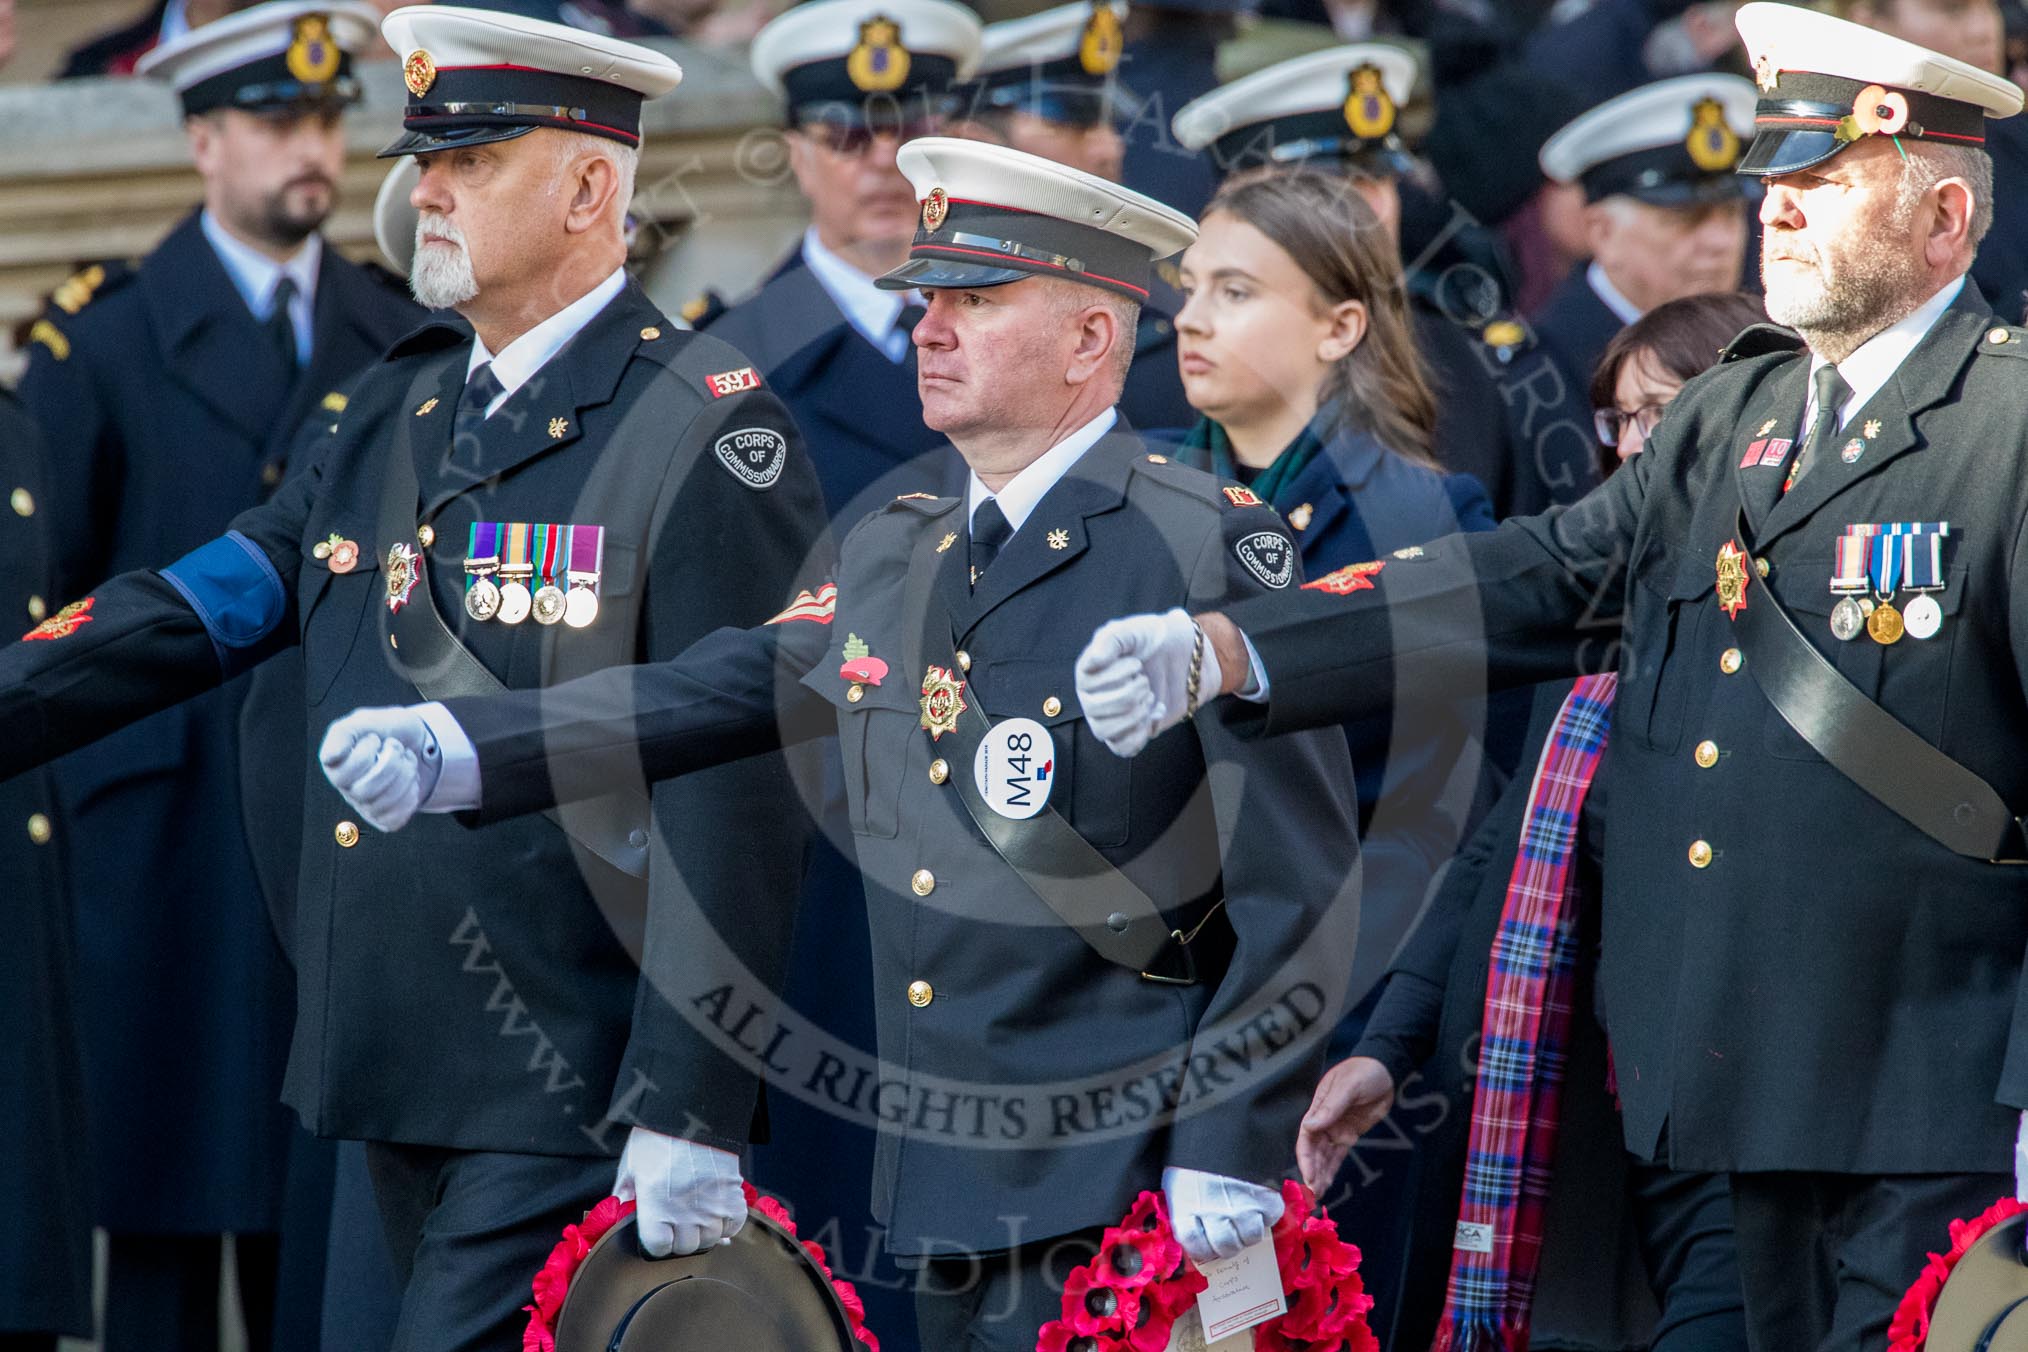 Corps Security (Group M48, 4 members) during the Royal British Legion March Past on Remembrance Sunday at the Cenotaph, Whitehall, Westminster, London, 11 November 2018, 12:31.